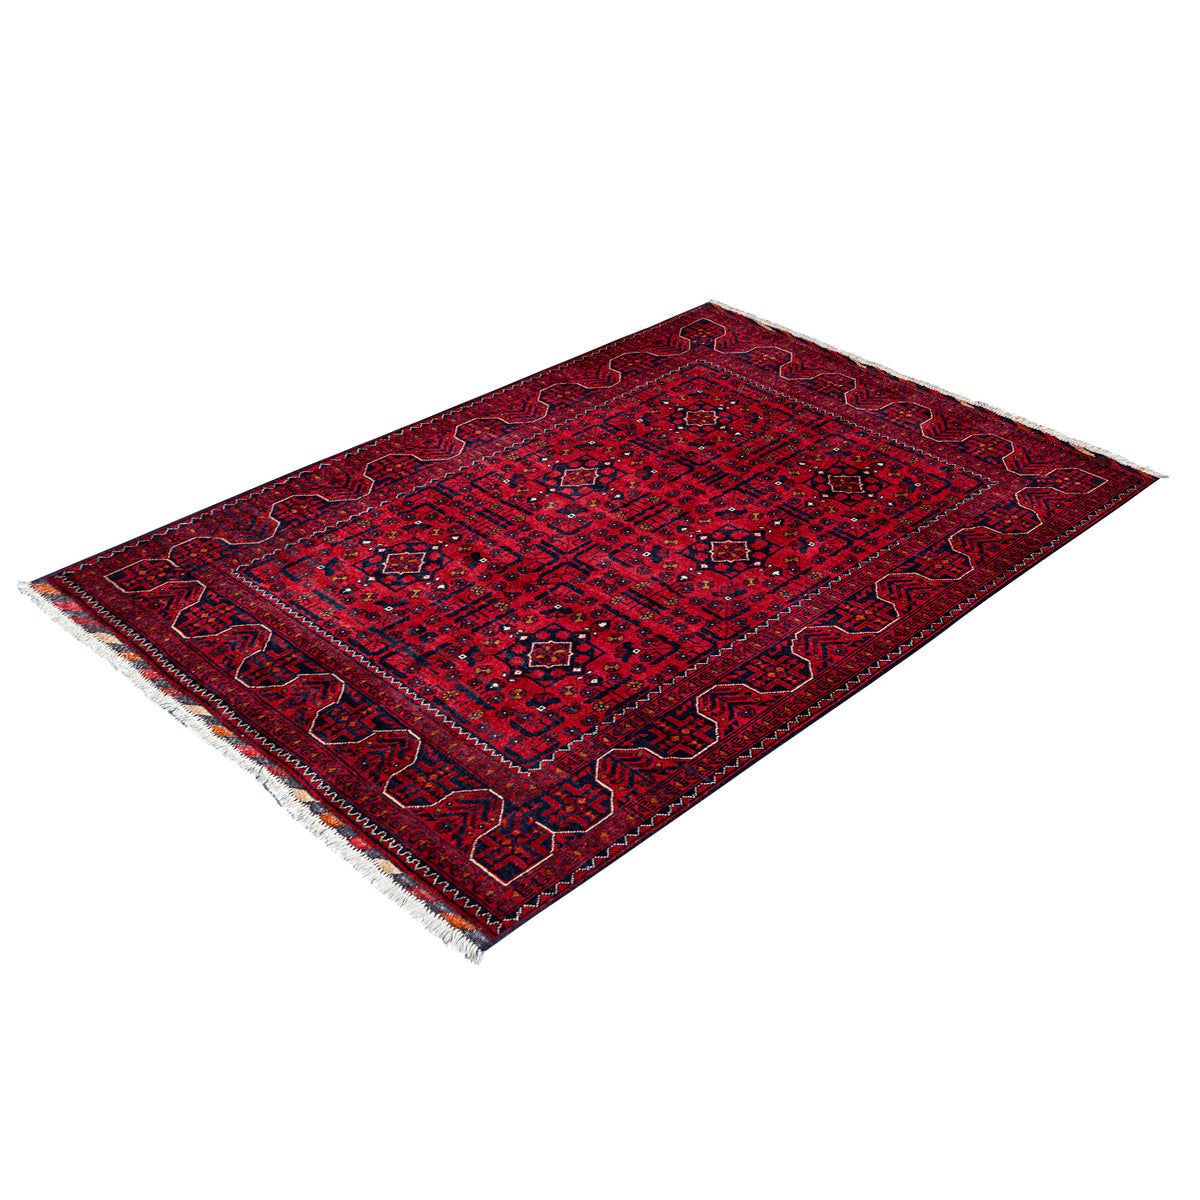 Fine Hand-knotted Traditional Wool Rug 148cm x 197cm